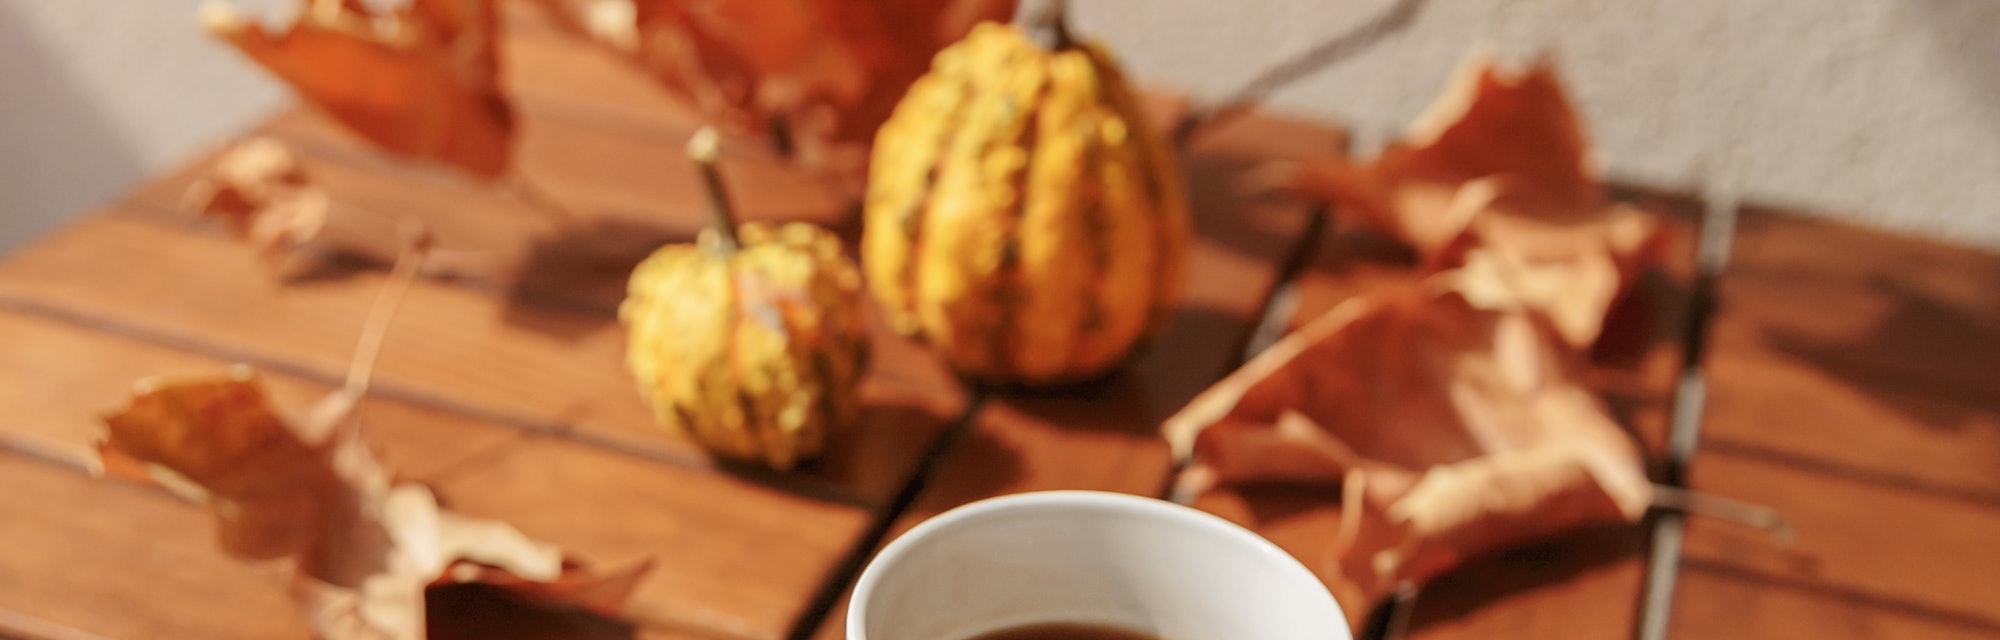 Morning cup of coffee on wooden table decorated with pumpkins and dried flowers outdoor. A woman's h...